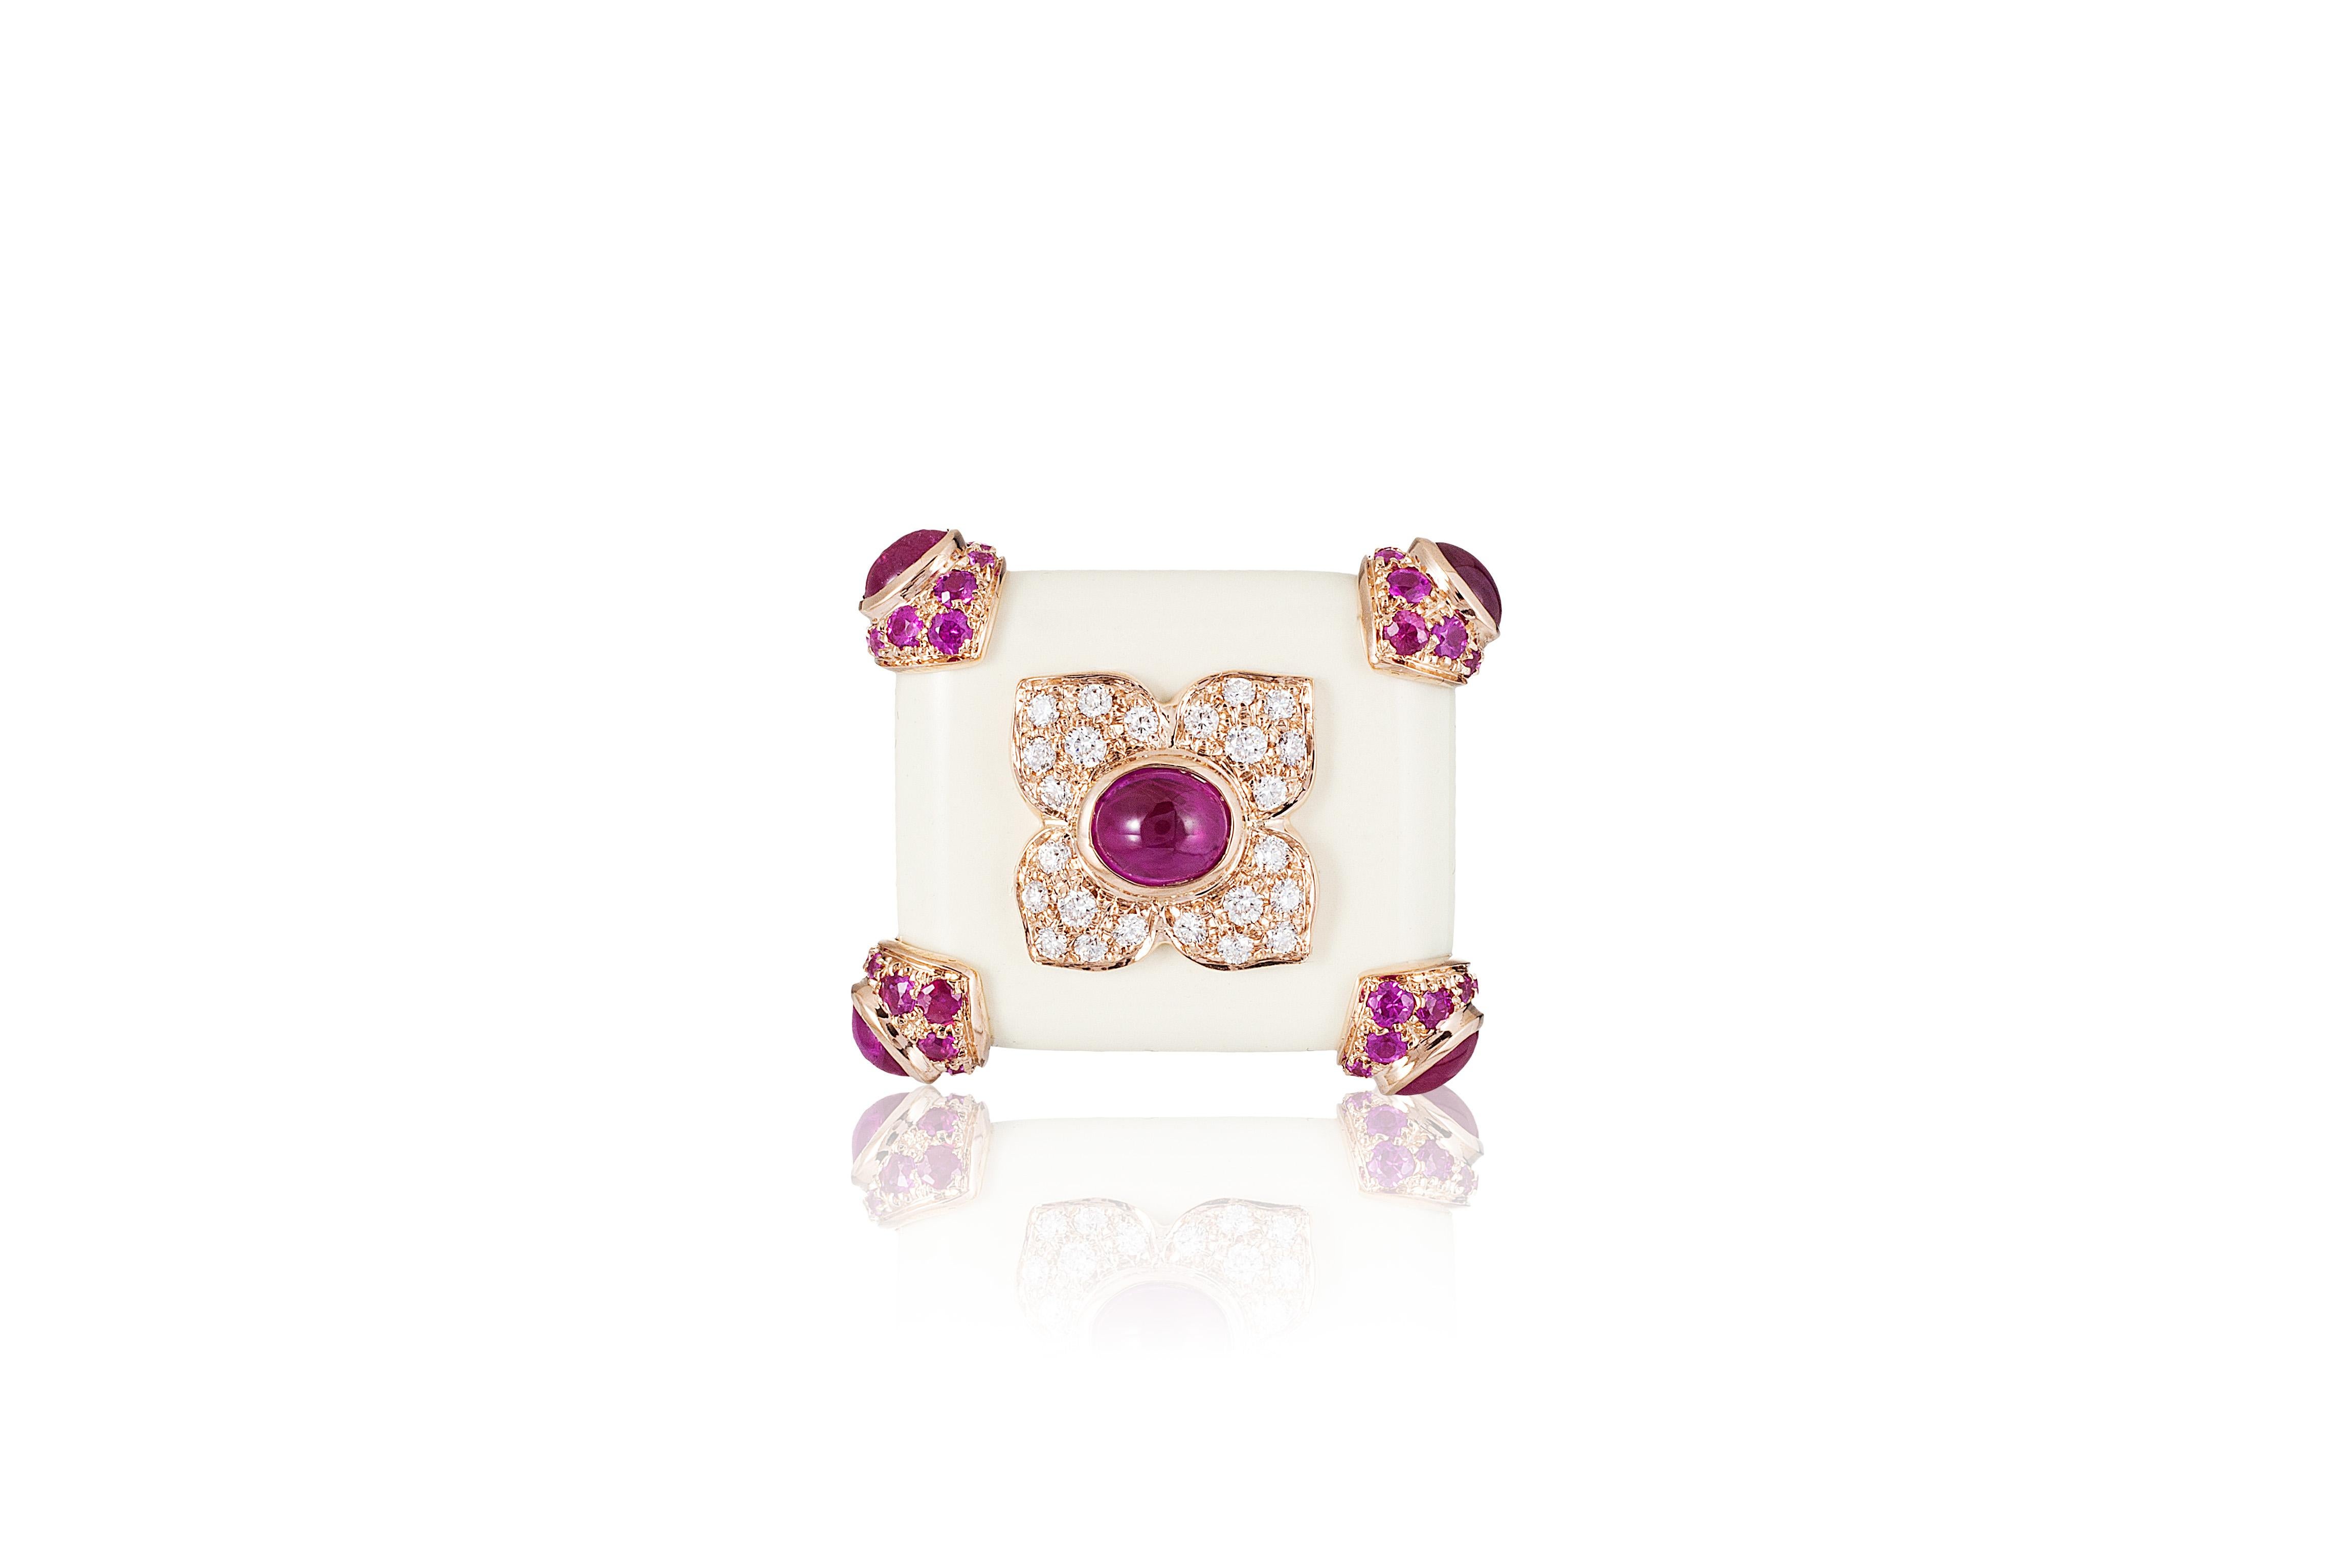 Contemporary Andreoli Agate Ruby Cabochon Diamond Pink Sapphire Cocktail Ring Rose 18kt Gold